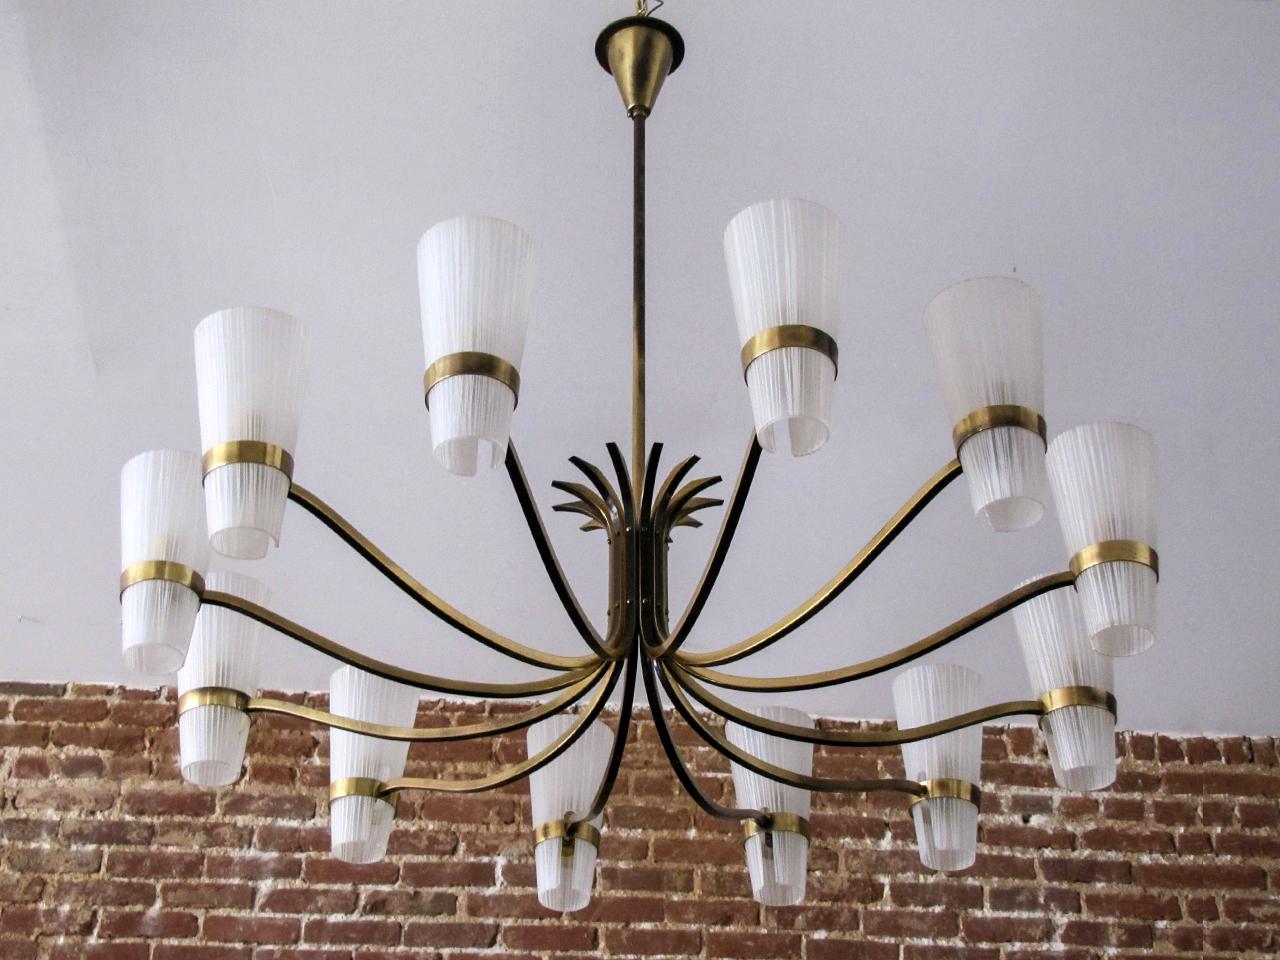 Stunning large decorative German twelve-arm brass chandelier, with two-tone brass arms and textured glass cups, wired for US standards, twelve E12 sockets, max. wattage 25w per socket, bulbs provided as a onetime courtesy.